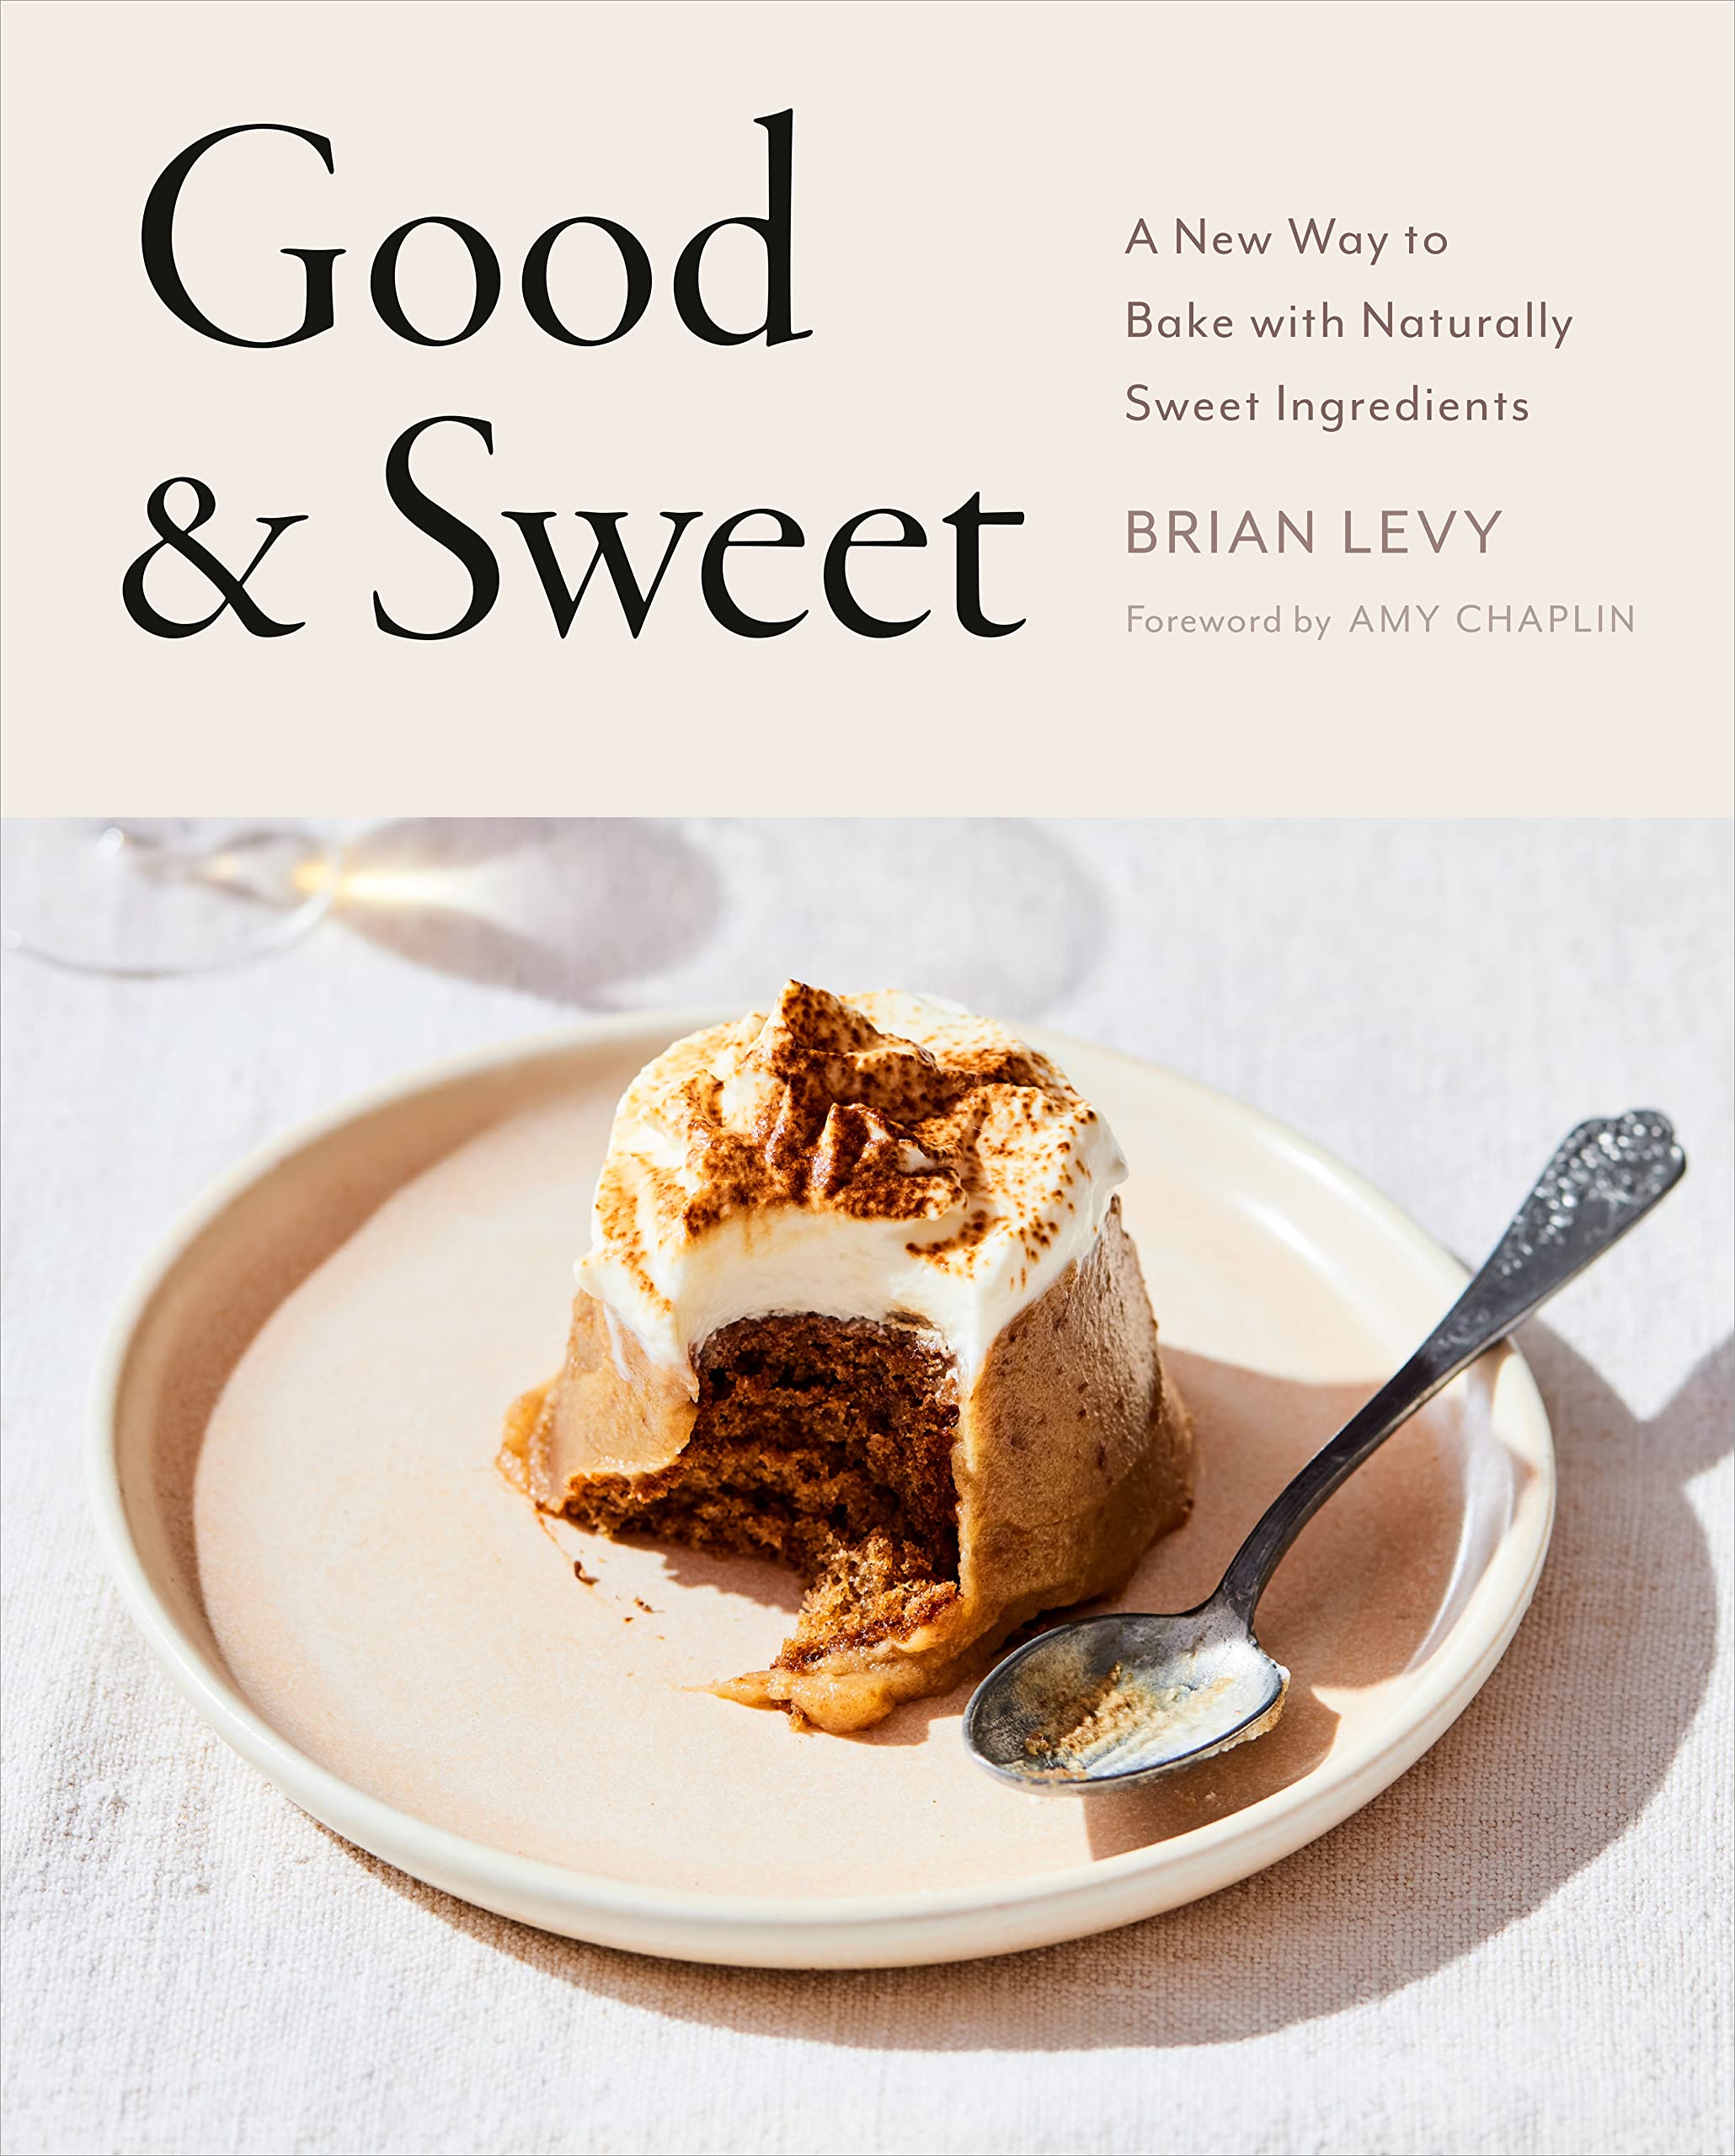 Good & Sweet: A New Way to Bake with Naturally Sweet Ingredients (Brian Levy)